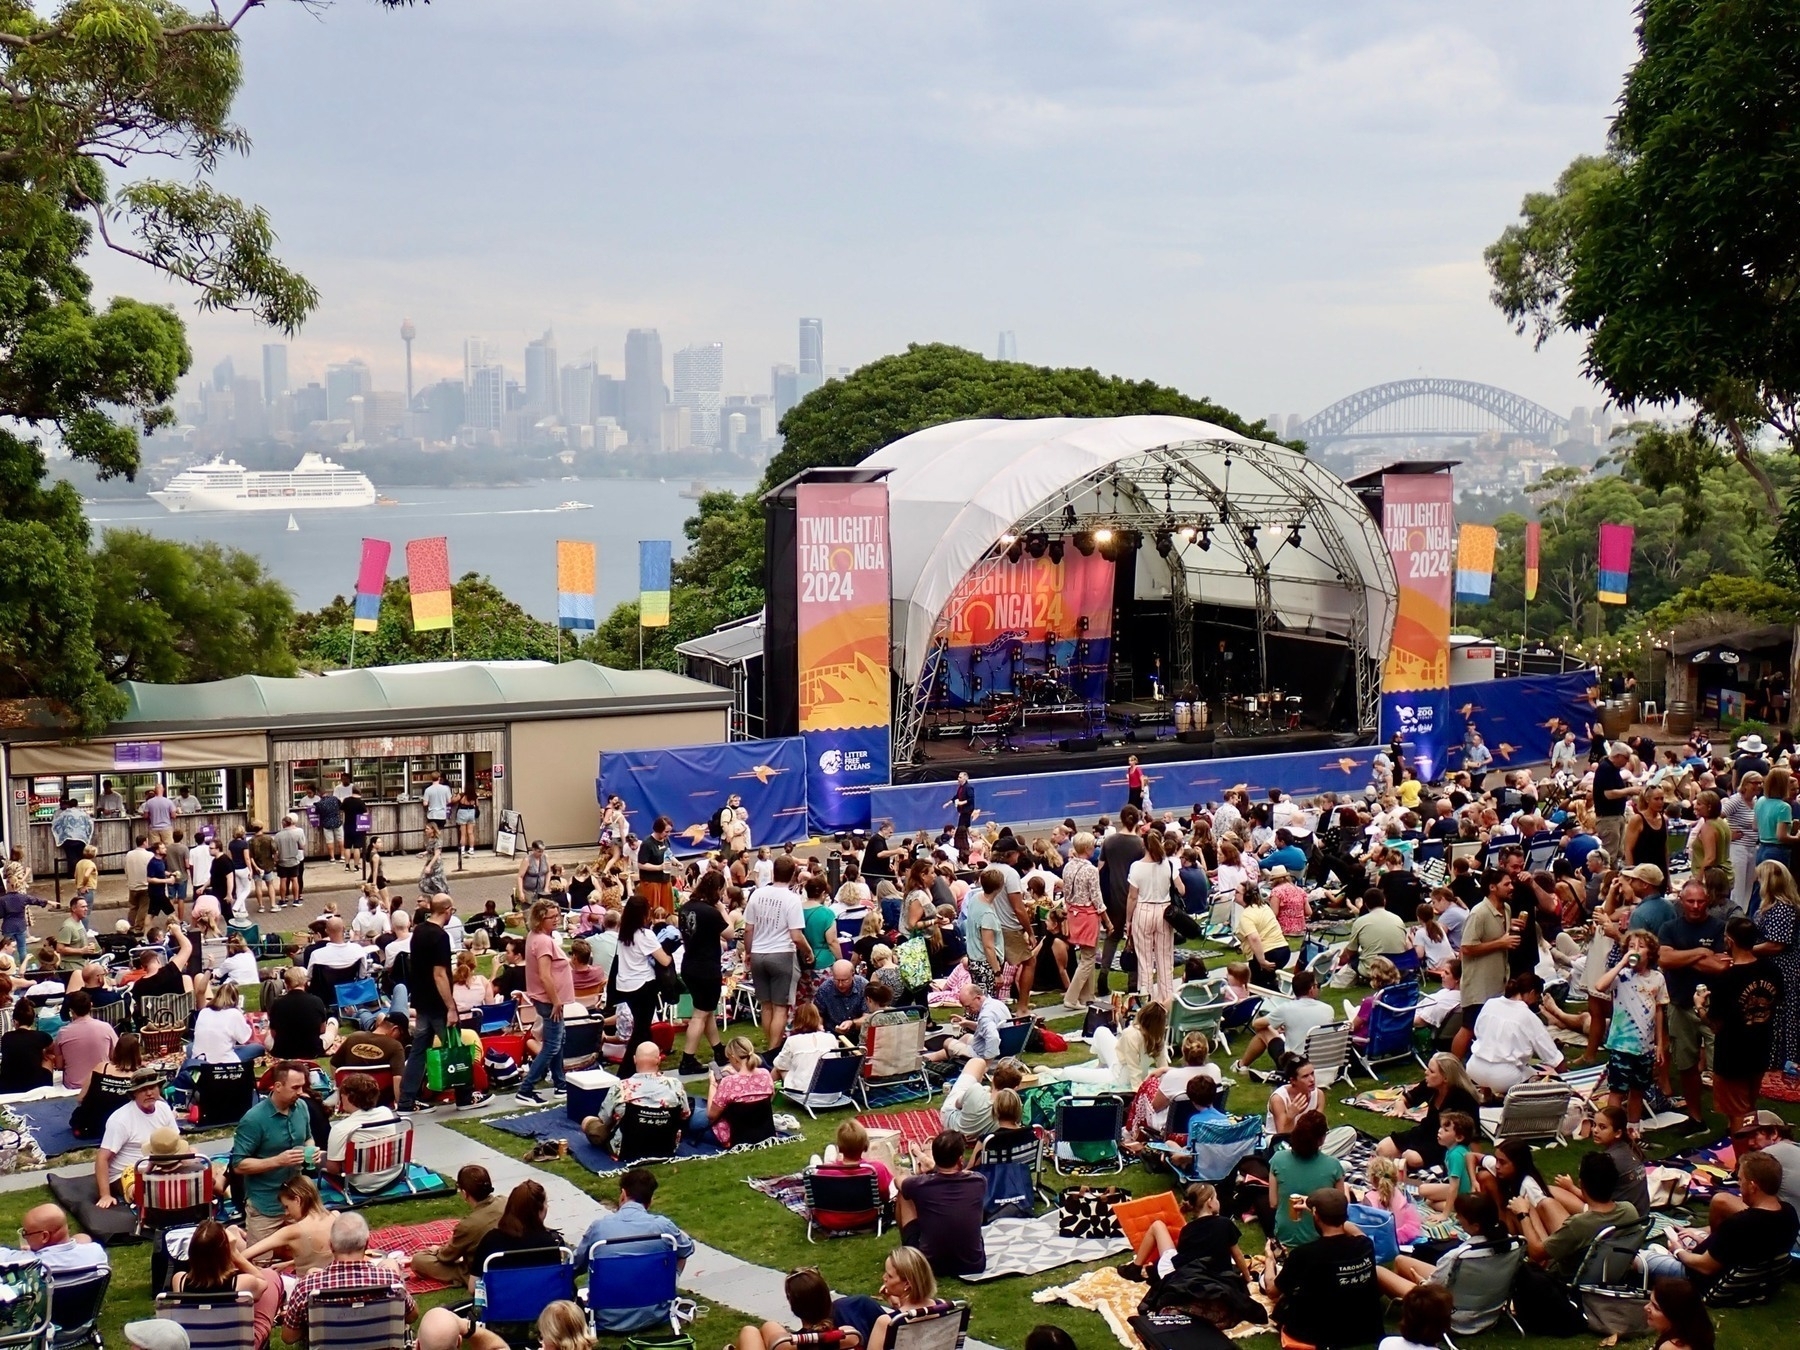 Looking over a crowd of people waiting for a concert, with a stage and the city of Sydney in the background